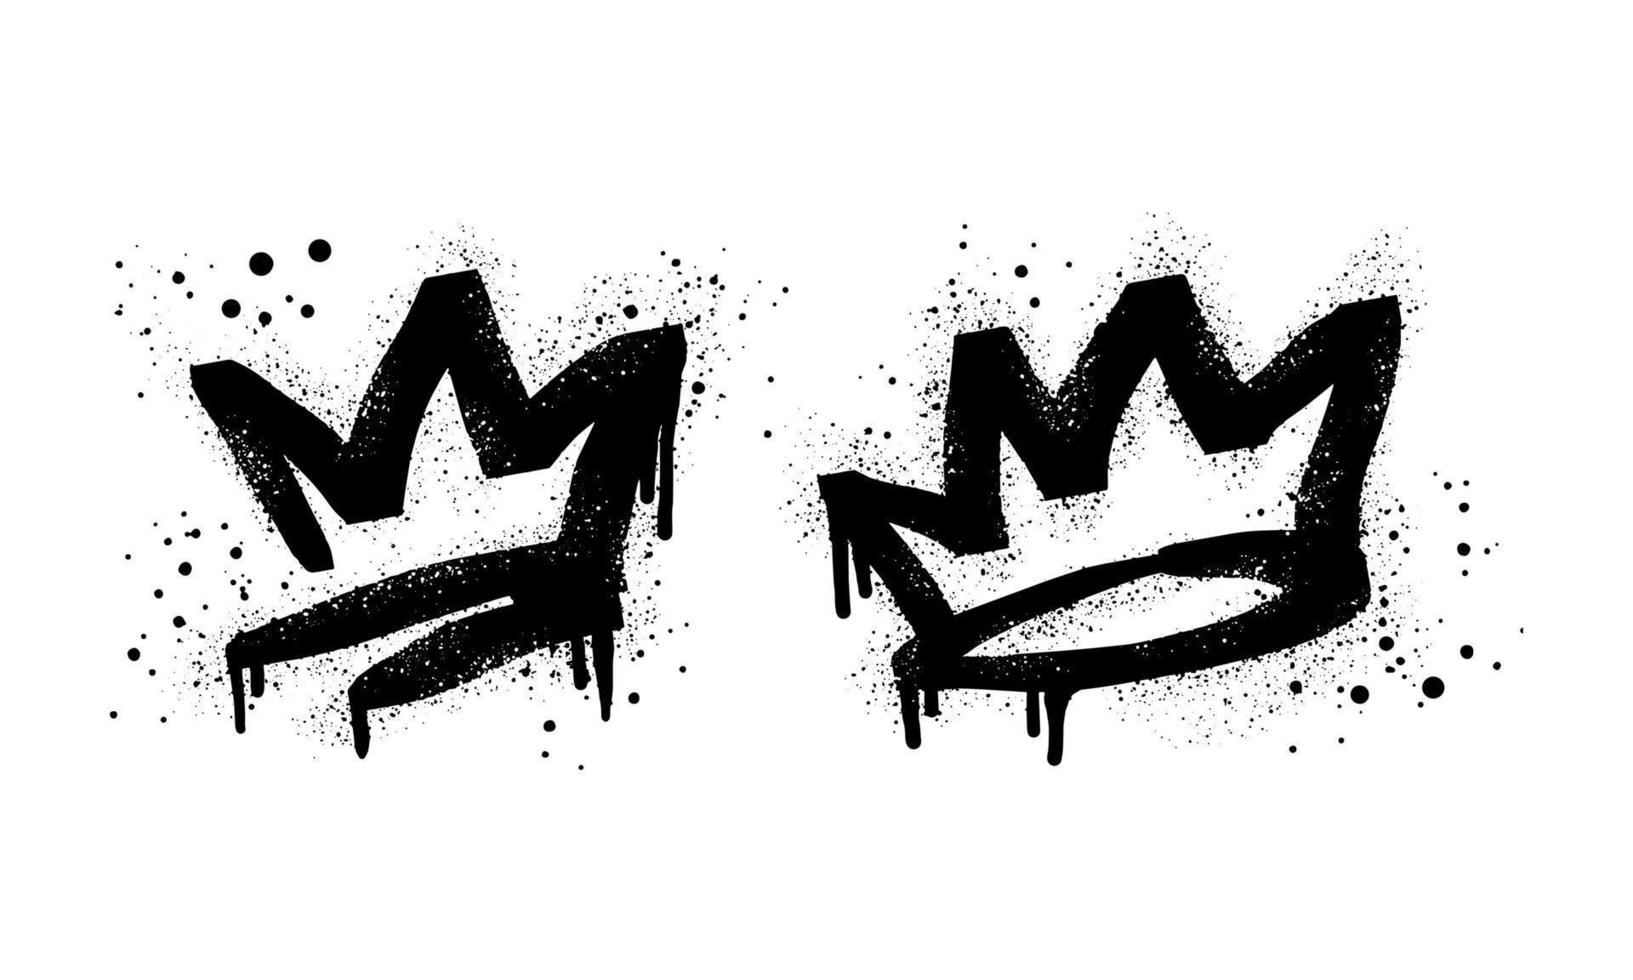 collection of Spray painted graffiti crown sign in black over white. Crown drip symbol. isolated on white background. vector illustration